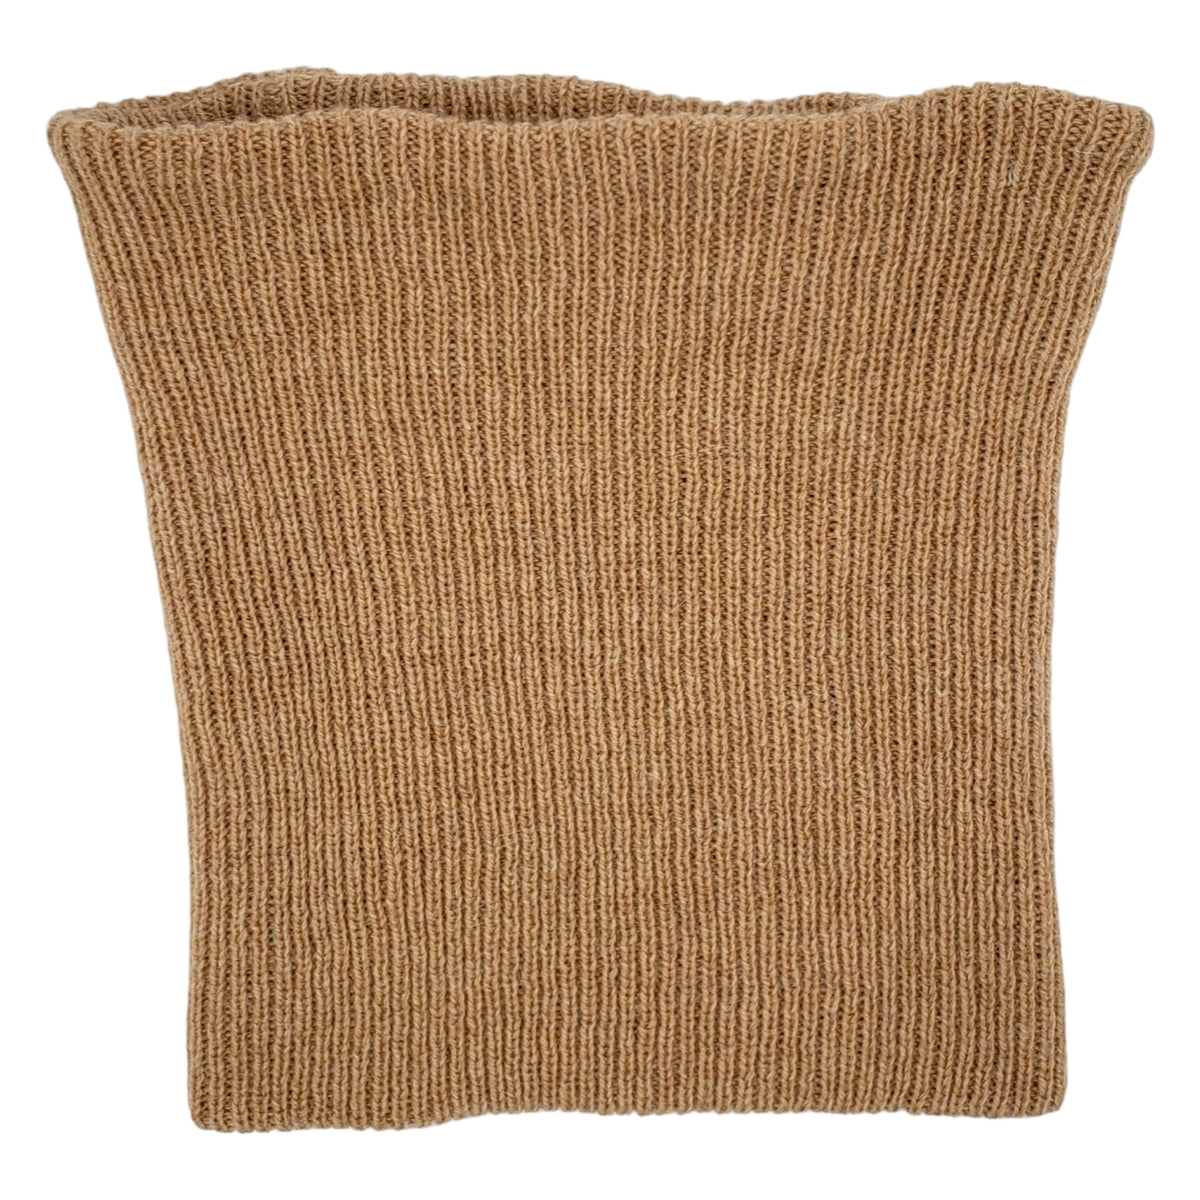 The English Difference Tan Rib Knit Neck Warmer